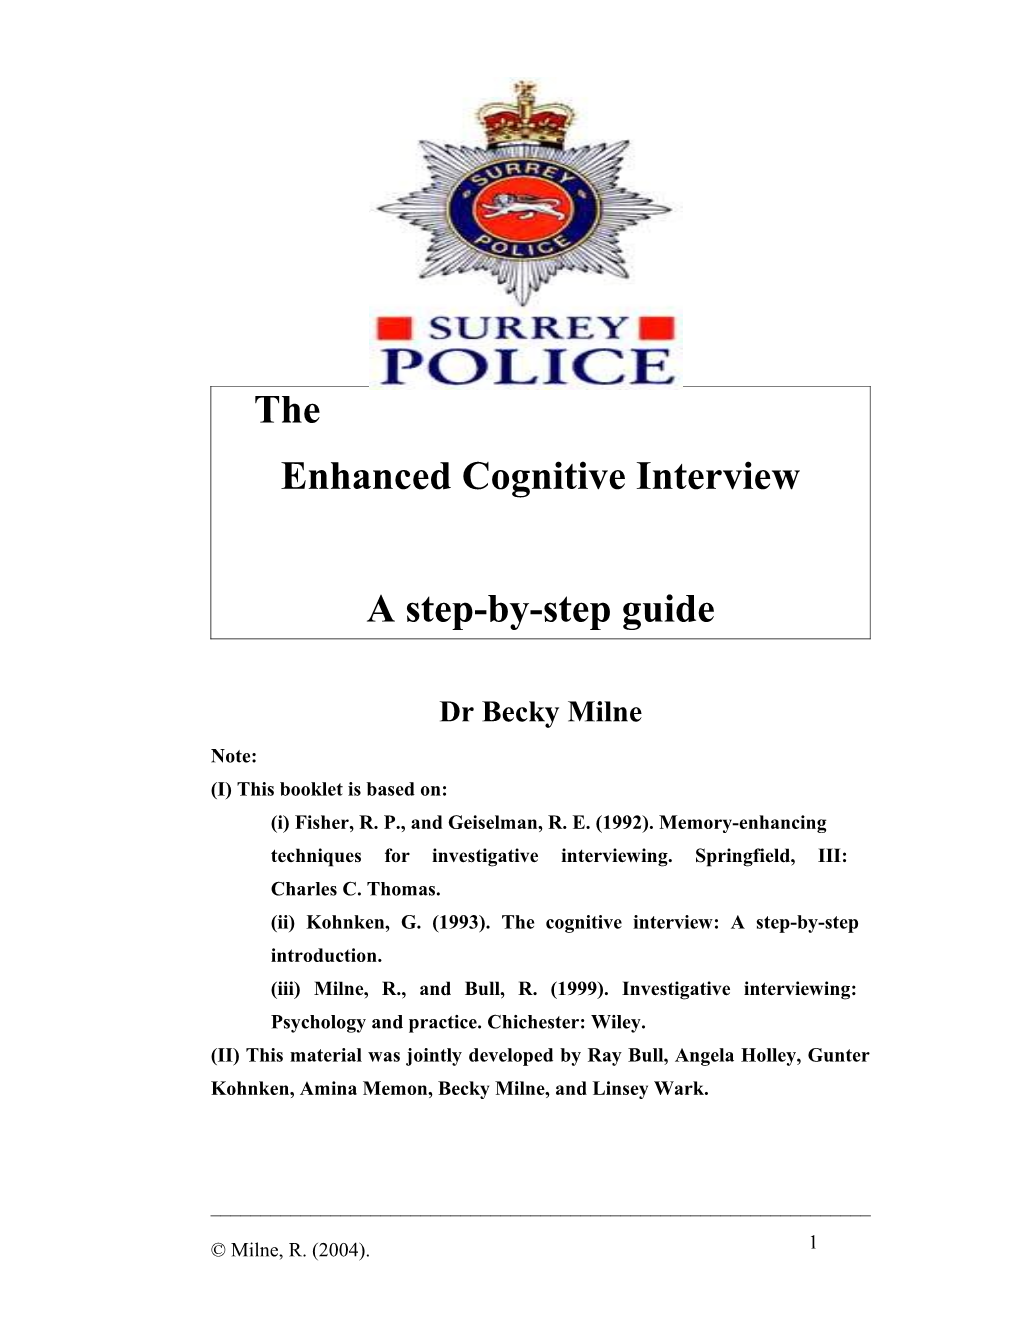 The Enhanced Cognitive Interview